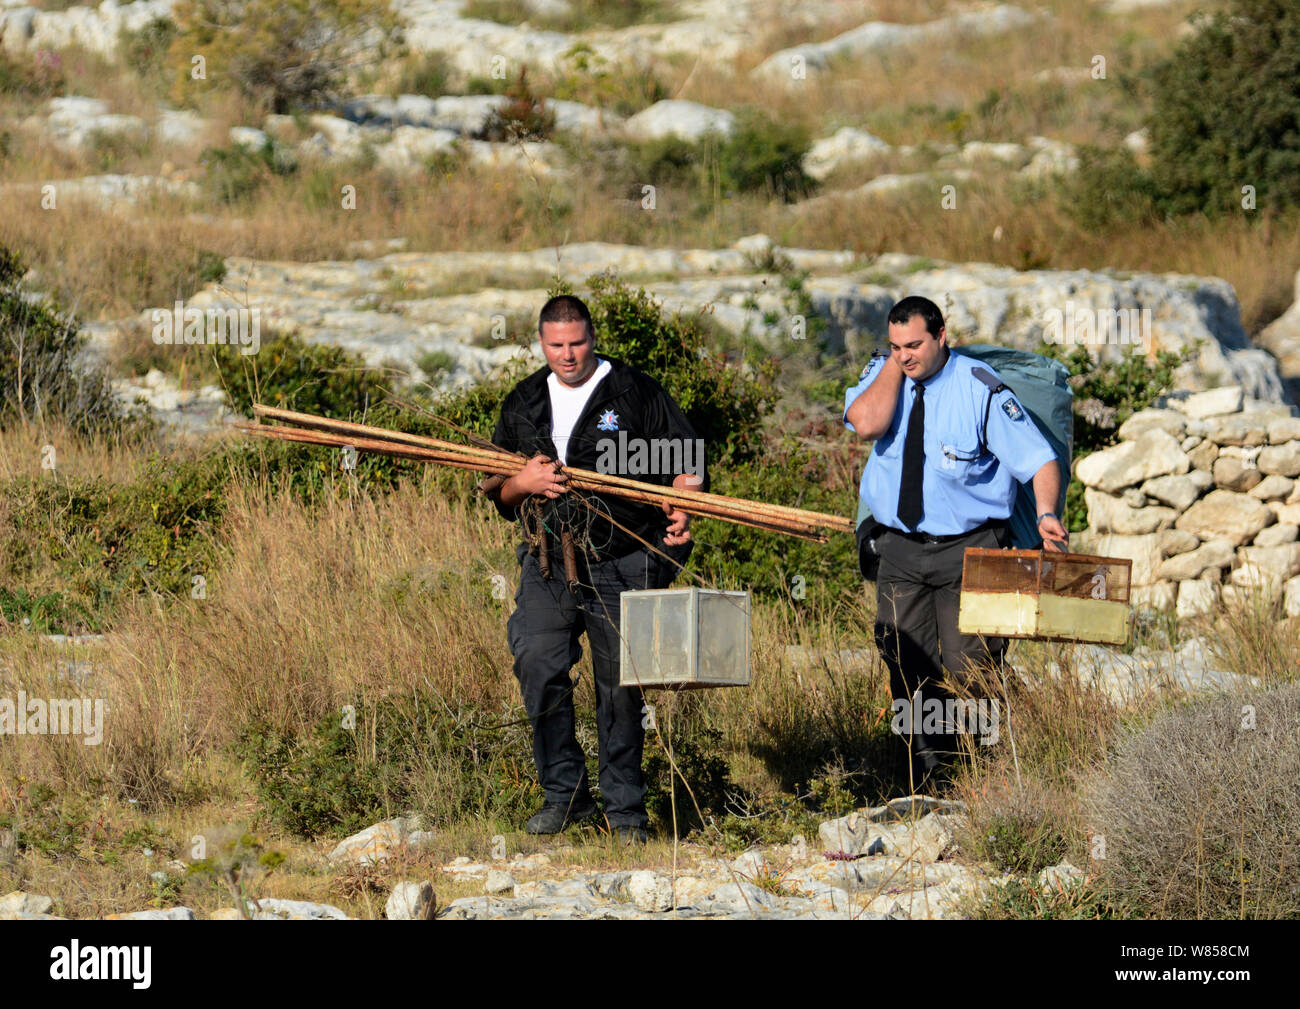 ALE (Administrative Law Enforcement) Police with confiscated turtle doves (Streptopelia turtur) and equipment from dove trapping area, Malta, during Birdlife Malta Springwatch Camp, April 2013 Stock Photo